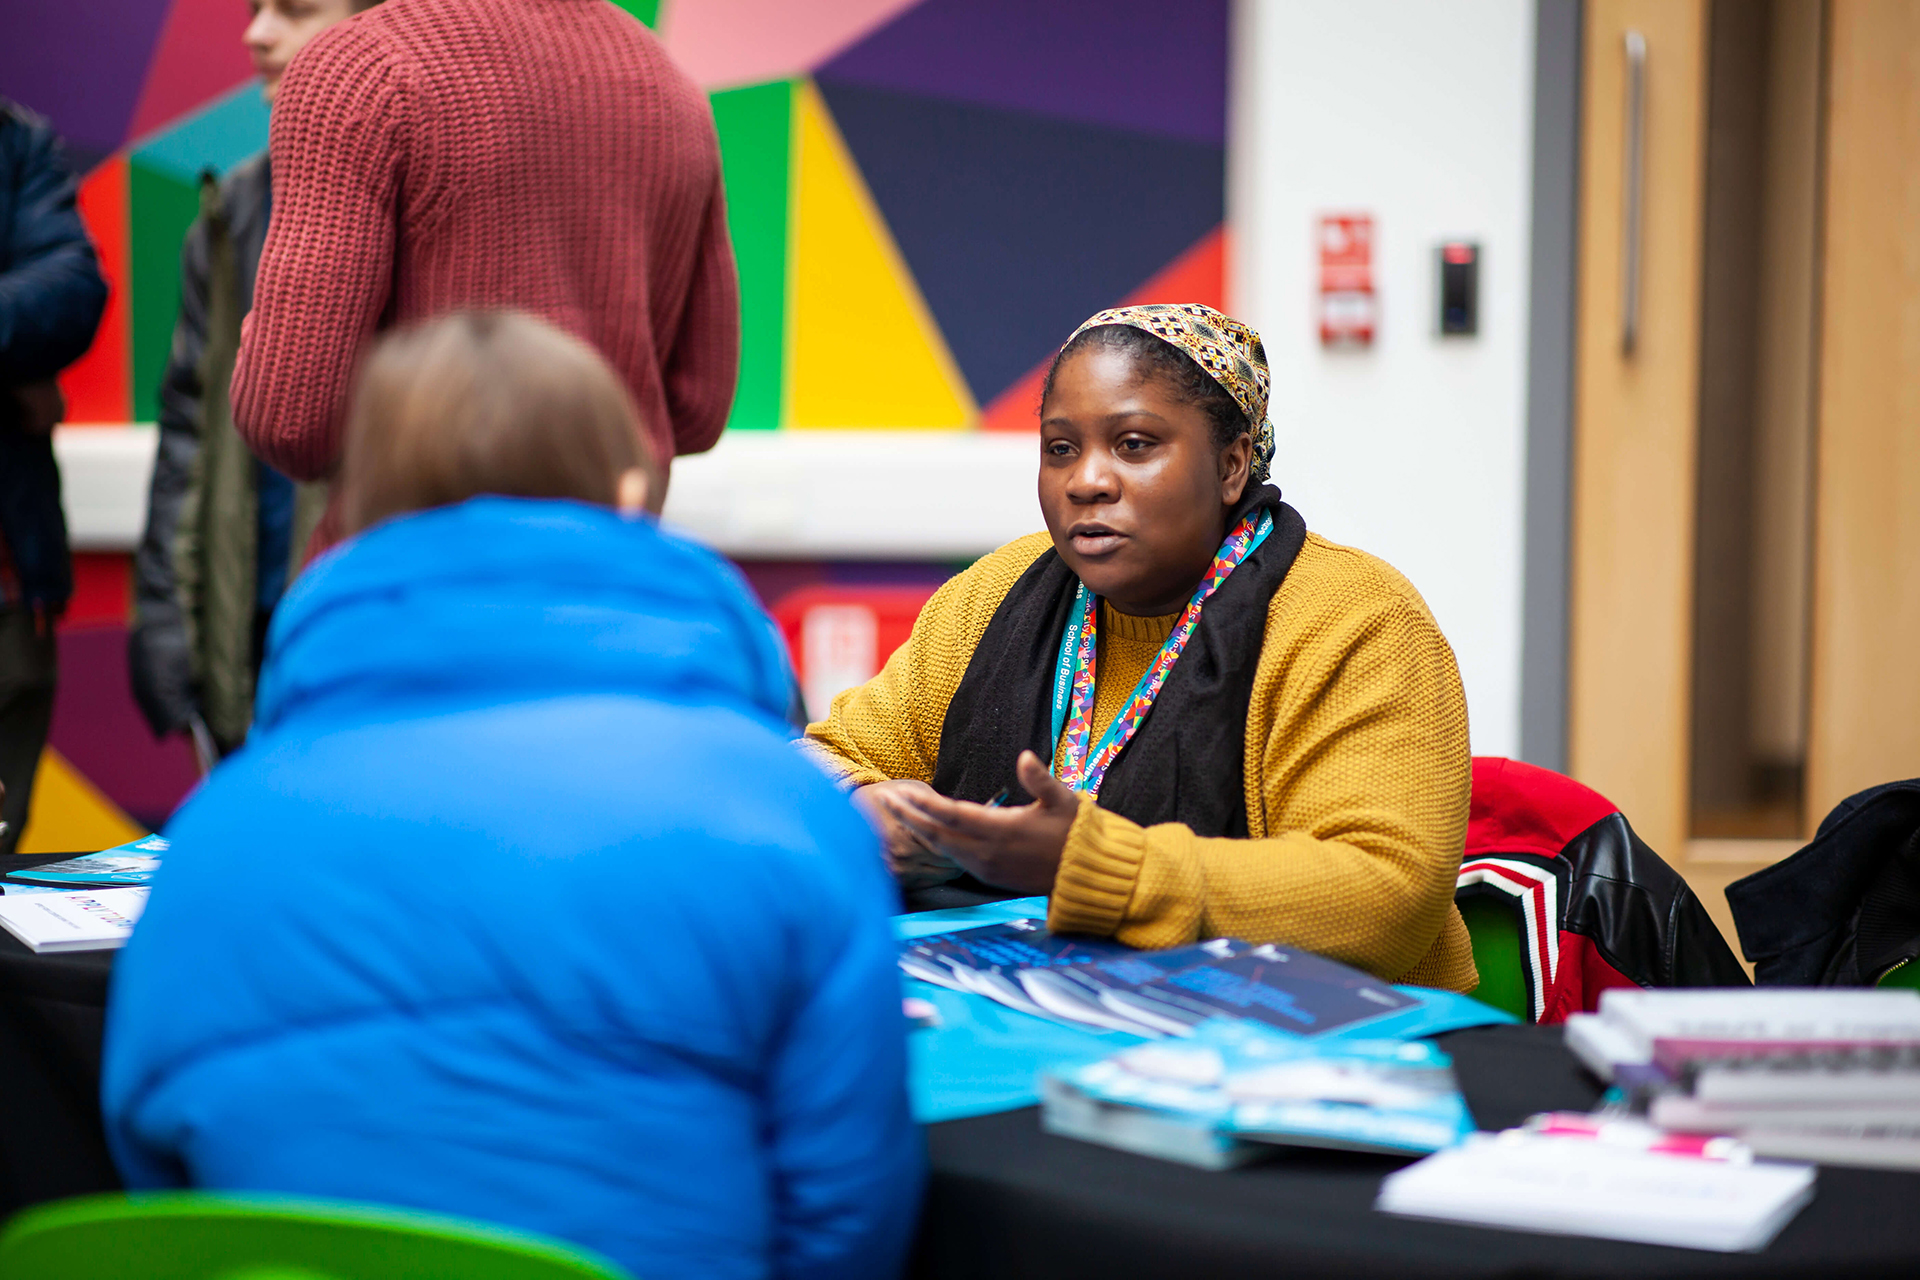 A Leeds City College tutor explaining to a prospective student about the course she teaches at an open event, there are posters, leaflets and prospectuses on the table